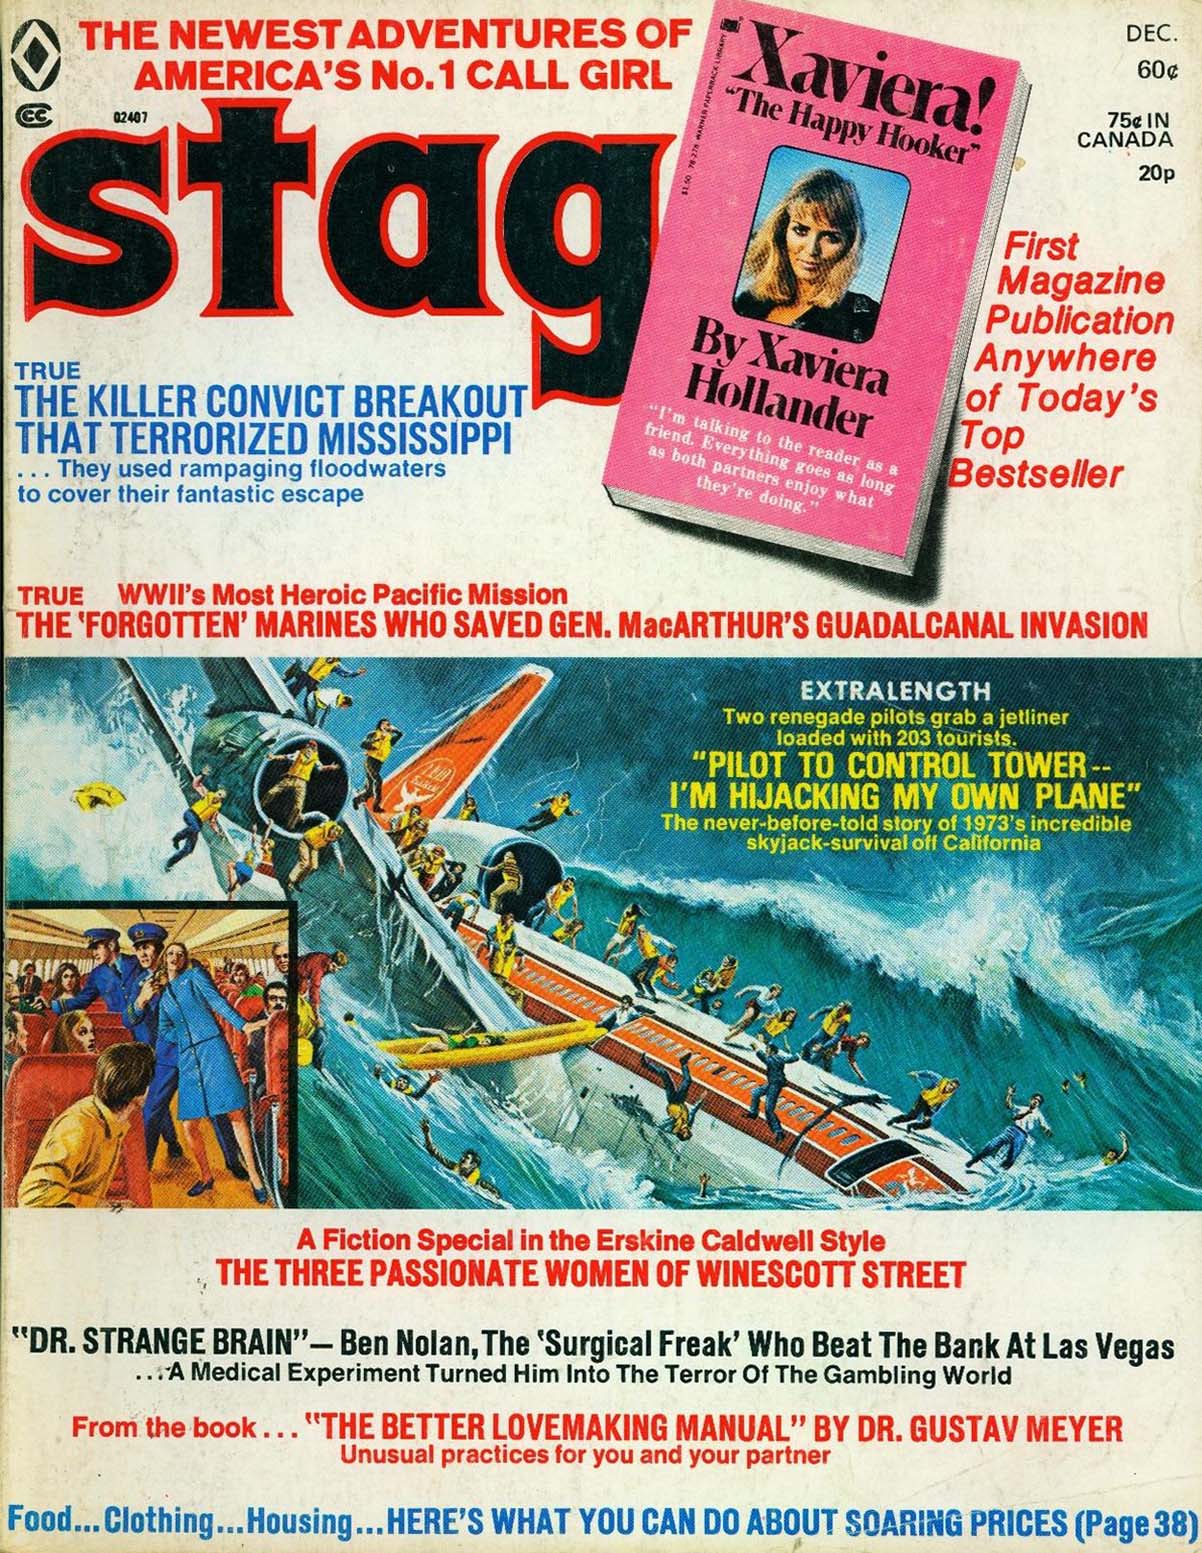 Stag December 1973 magazine back issue Stag magizine back copy Stag December 1973 Magazine for Men Adult Back Issue Published by Leeds Publishing Corp. The Newest Adventures Of America's No.1 Call Girl.